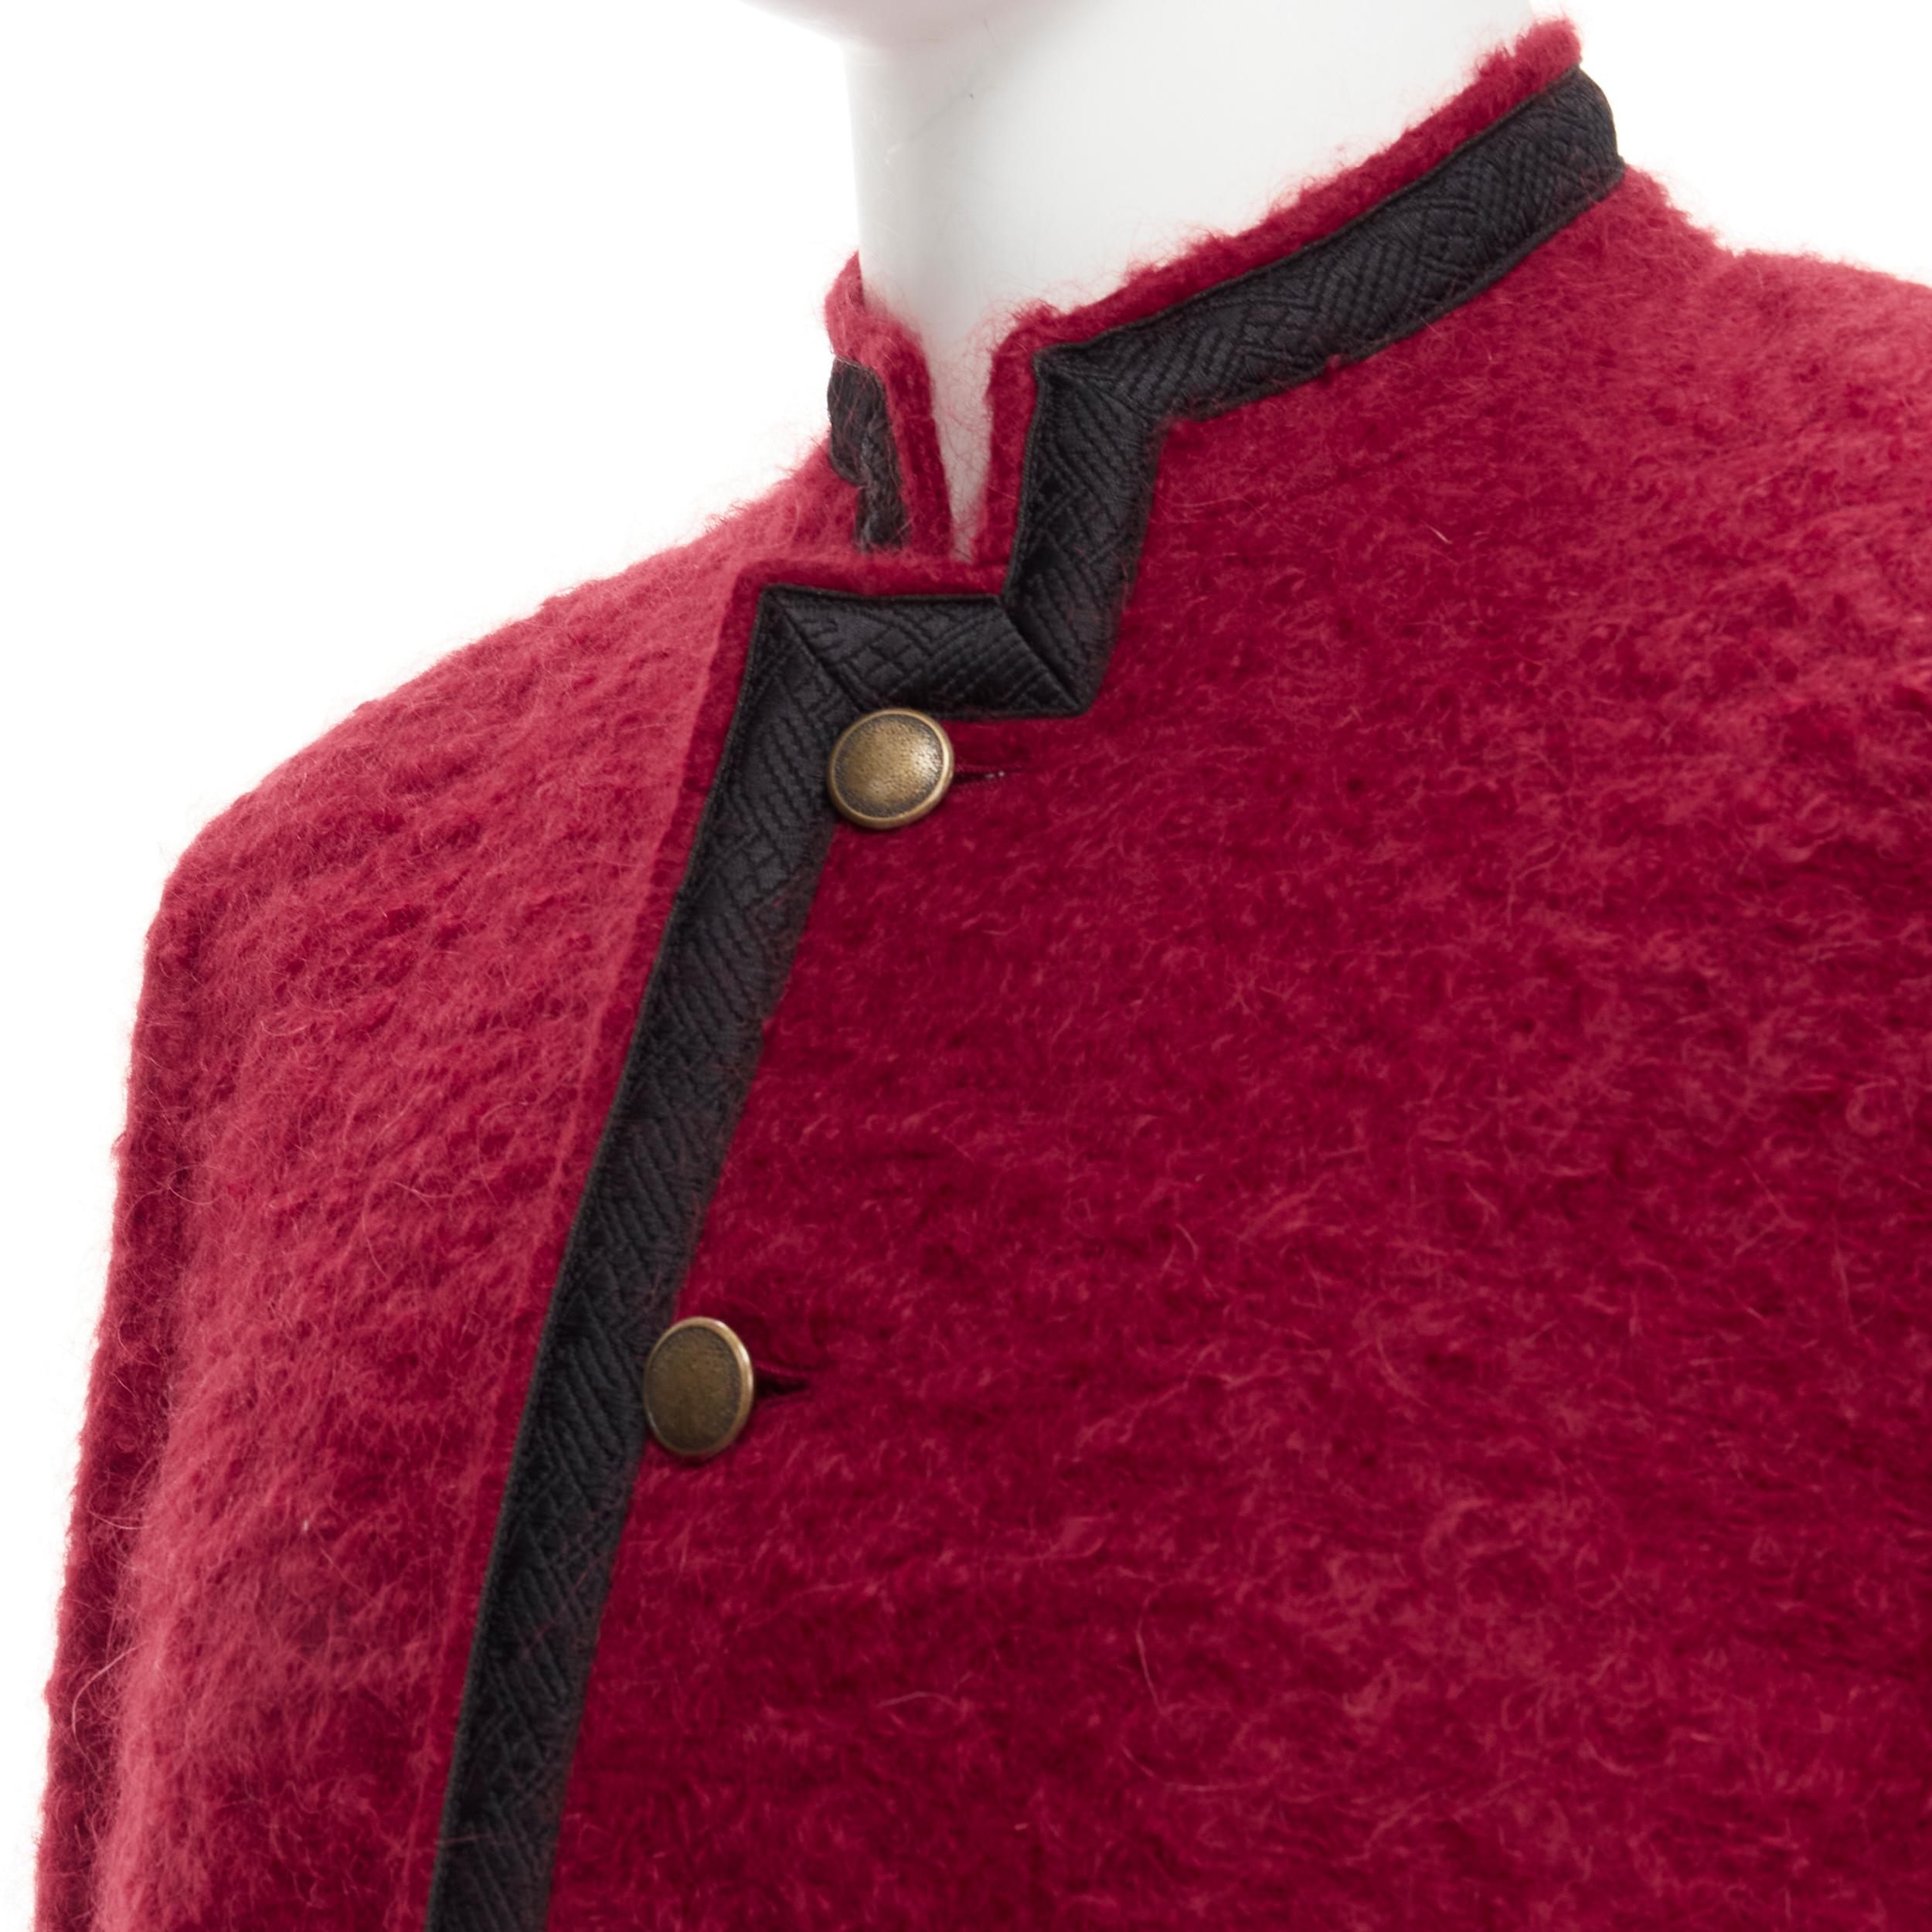 SAINT LAURENT red wool mohair antique buttons military jacket coat EU52 XL
Reference: CNLE/A00188
Brand: Saint Laurent
Designer: Anthony Vaccarello
Material: Virgin Wool, Mohair
Color: Red, Black
Pattern: Solid
Closure: Button
Lining: Fabric
Extra